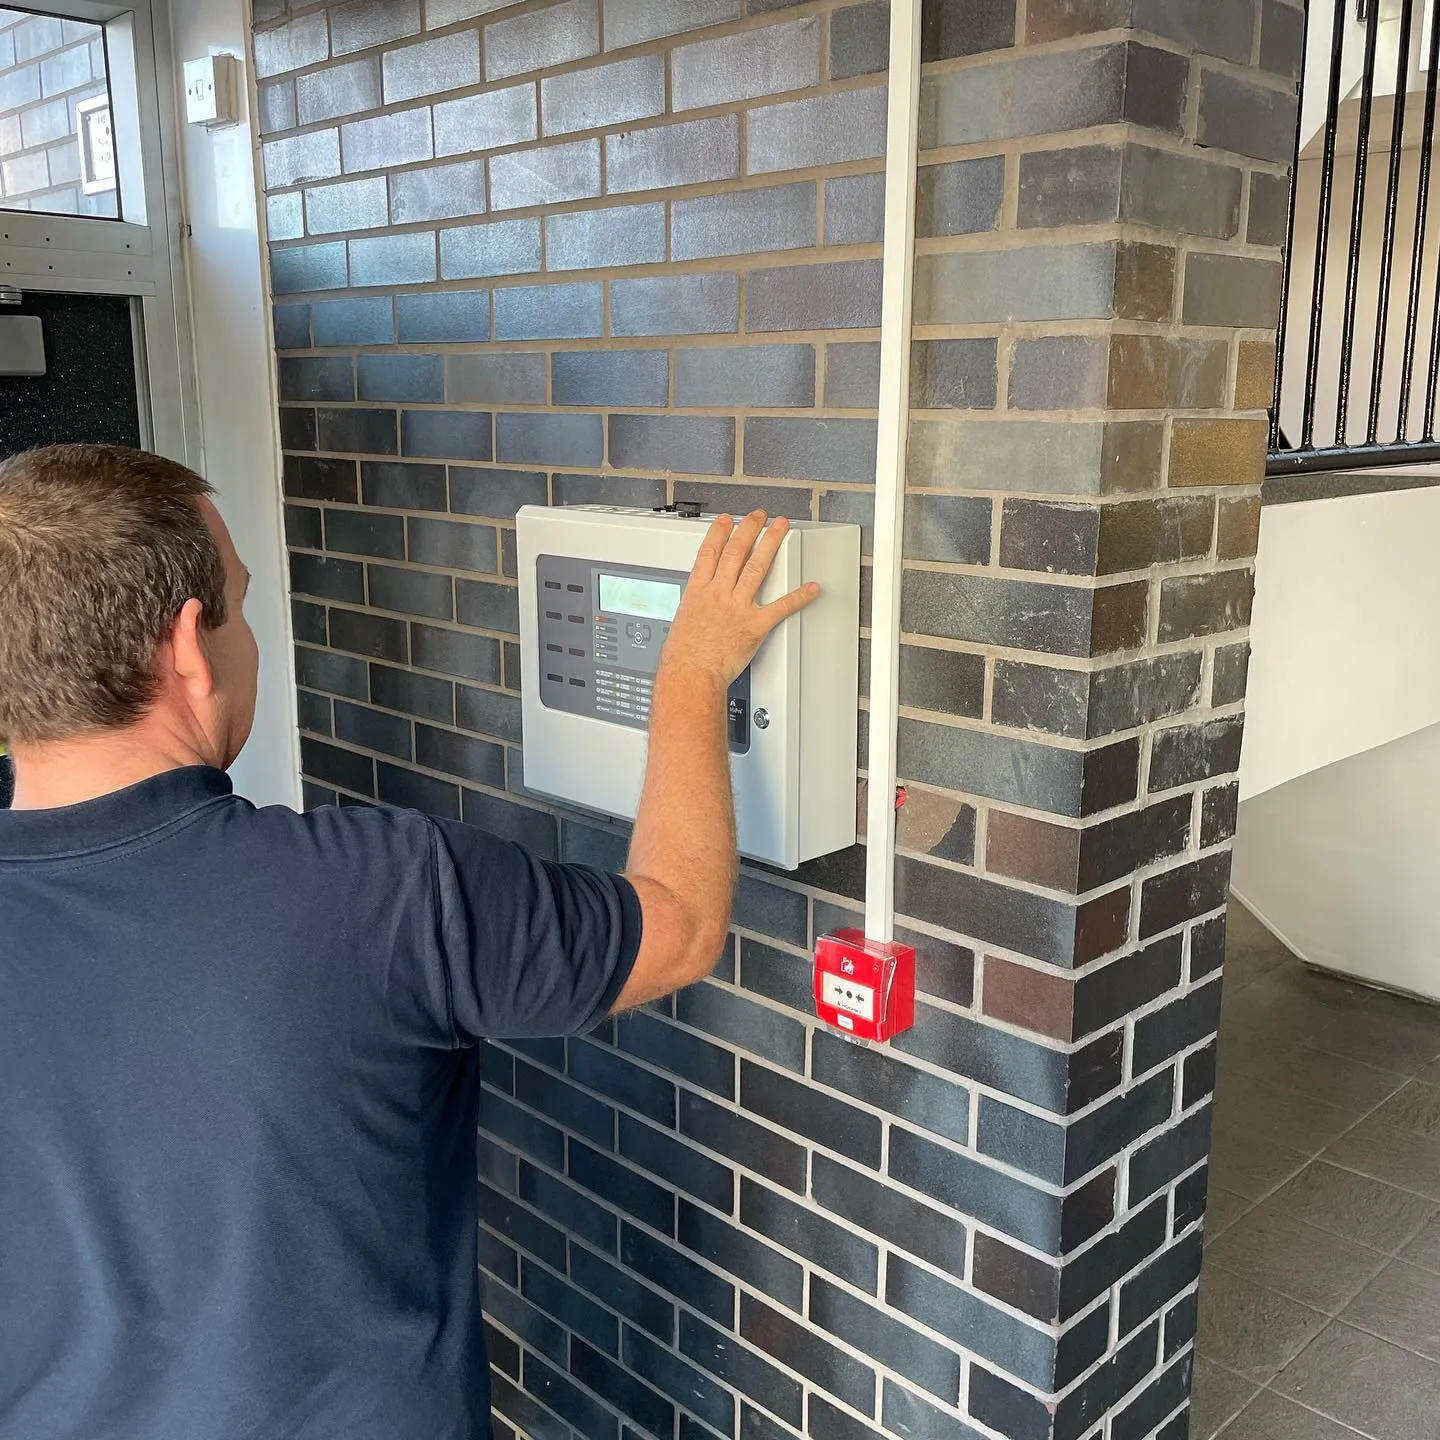 a man is pressing a button on a brick wall